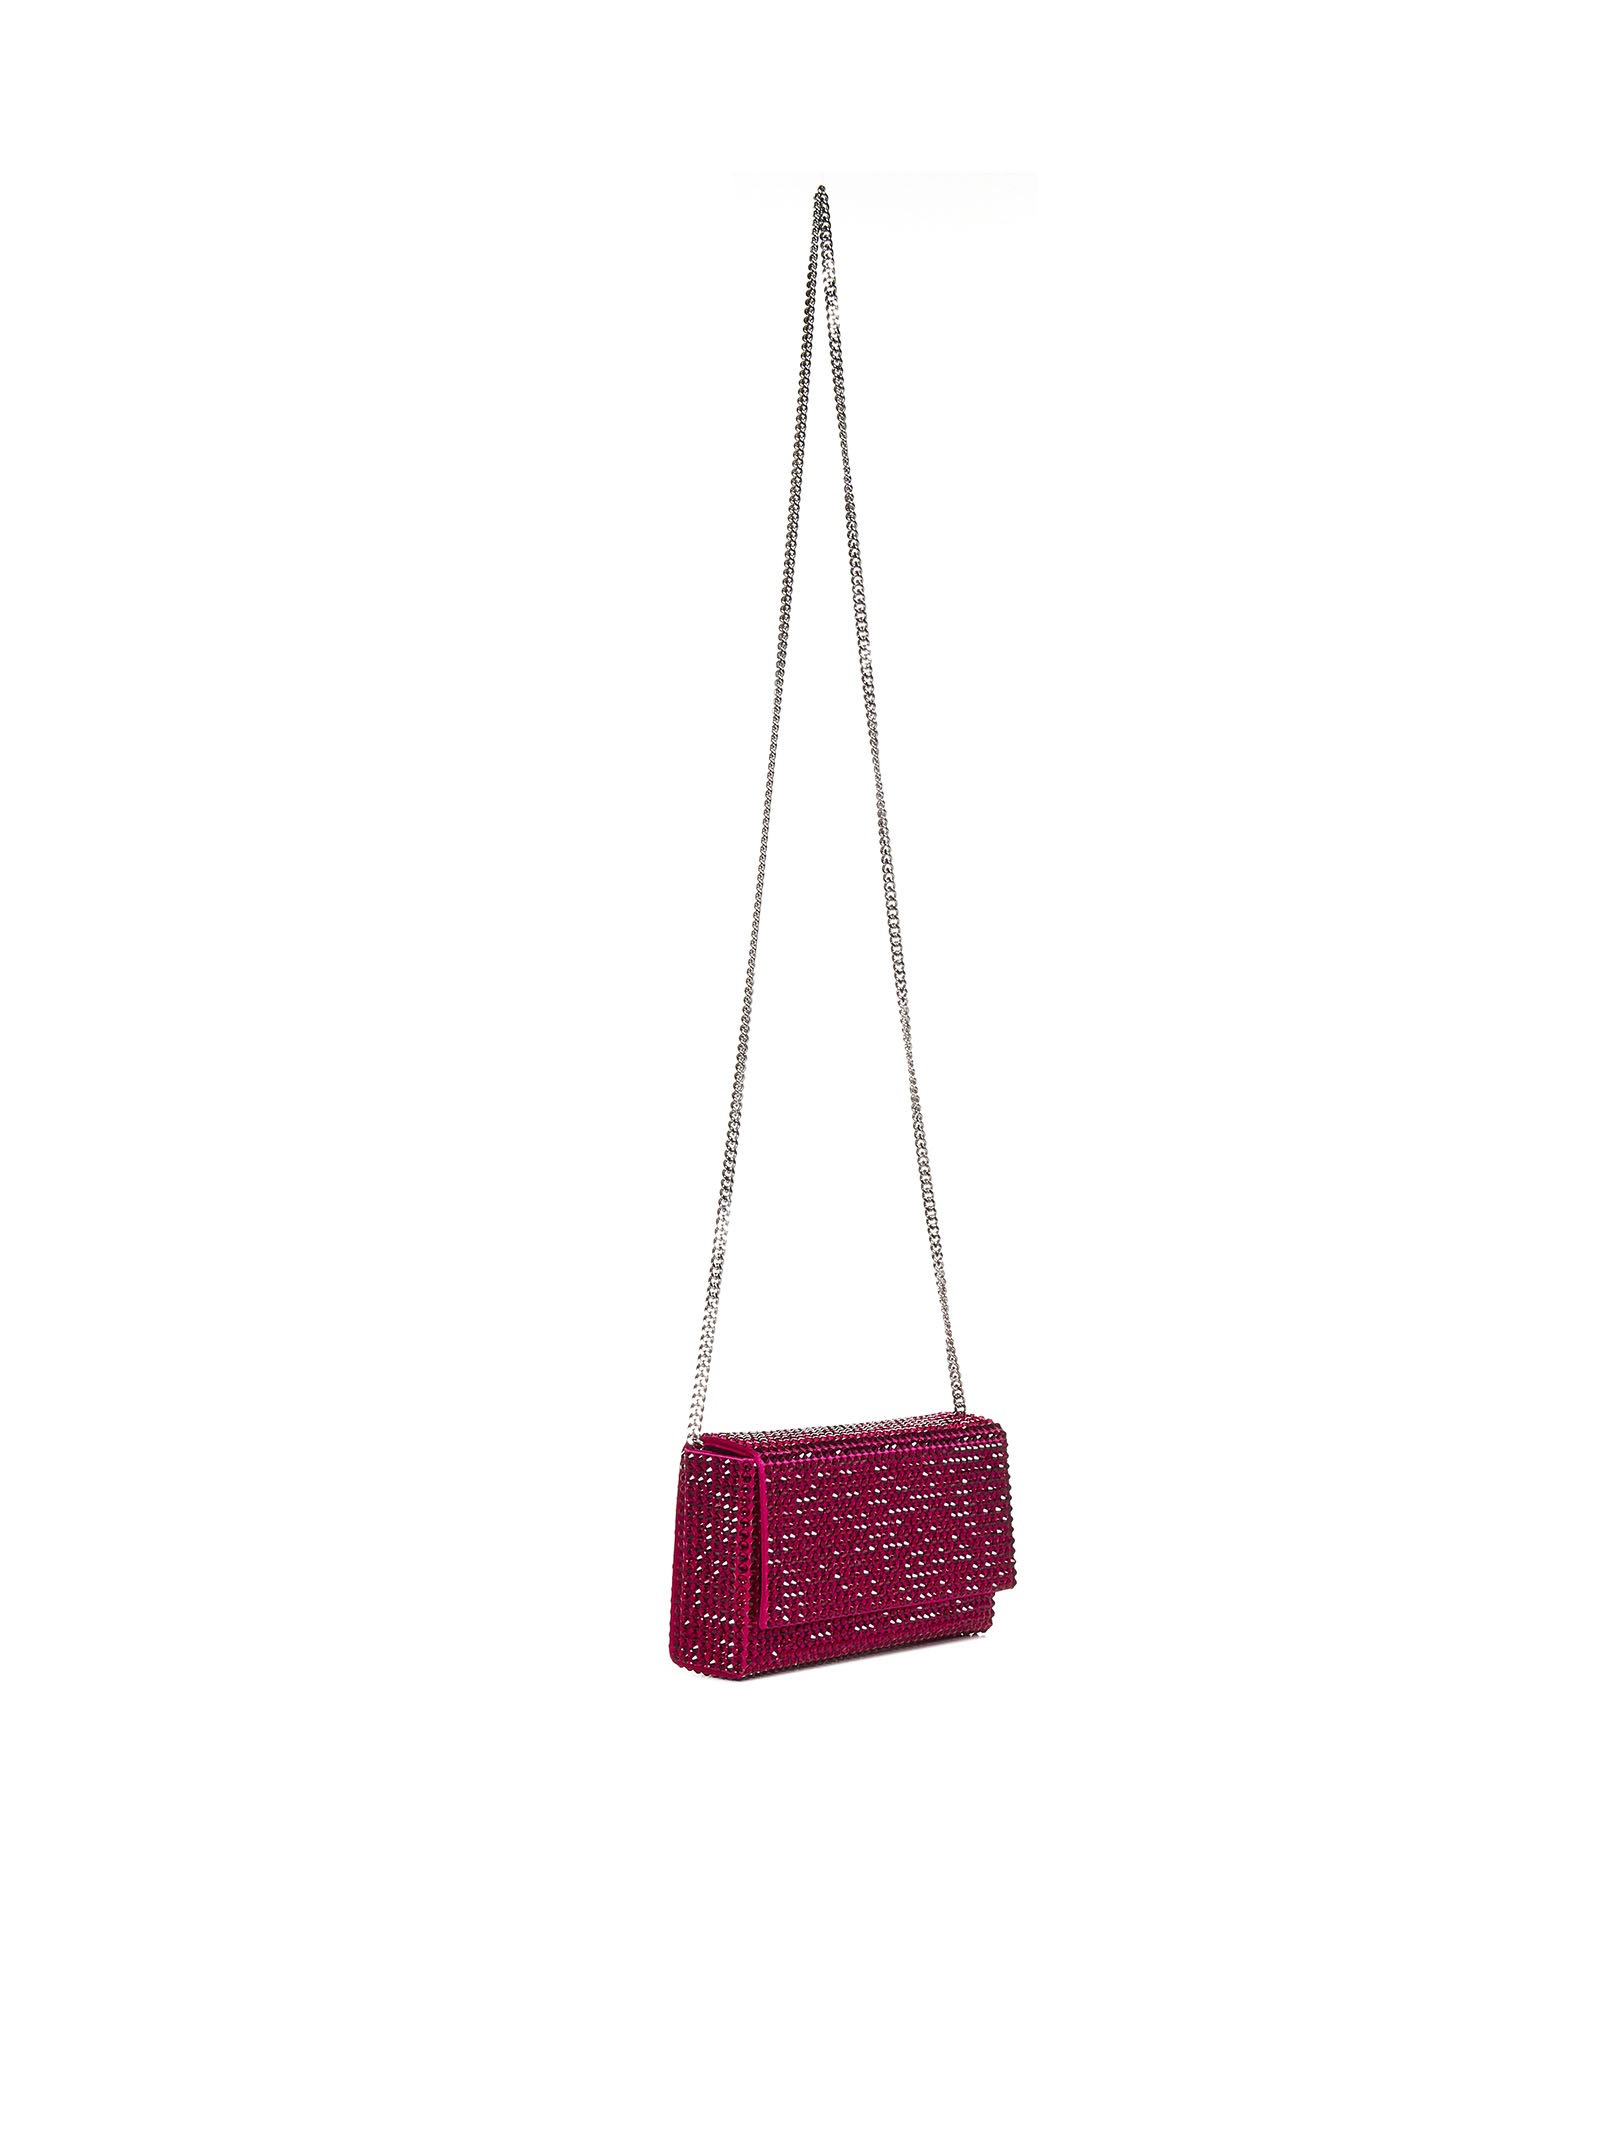 SUPER AMINI PALOMA ruby clutch in satin and crystals with chain shoulder strap. - 3